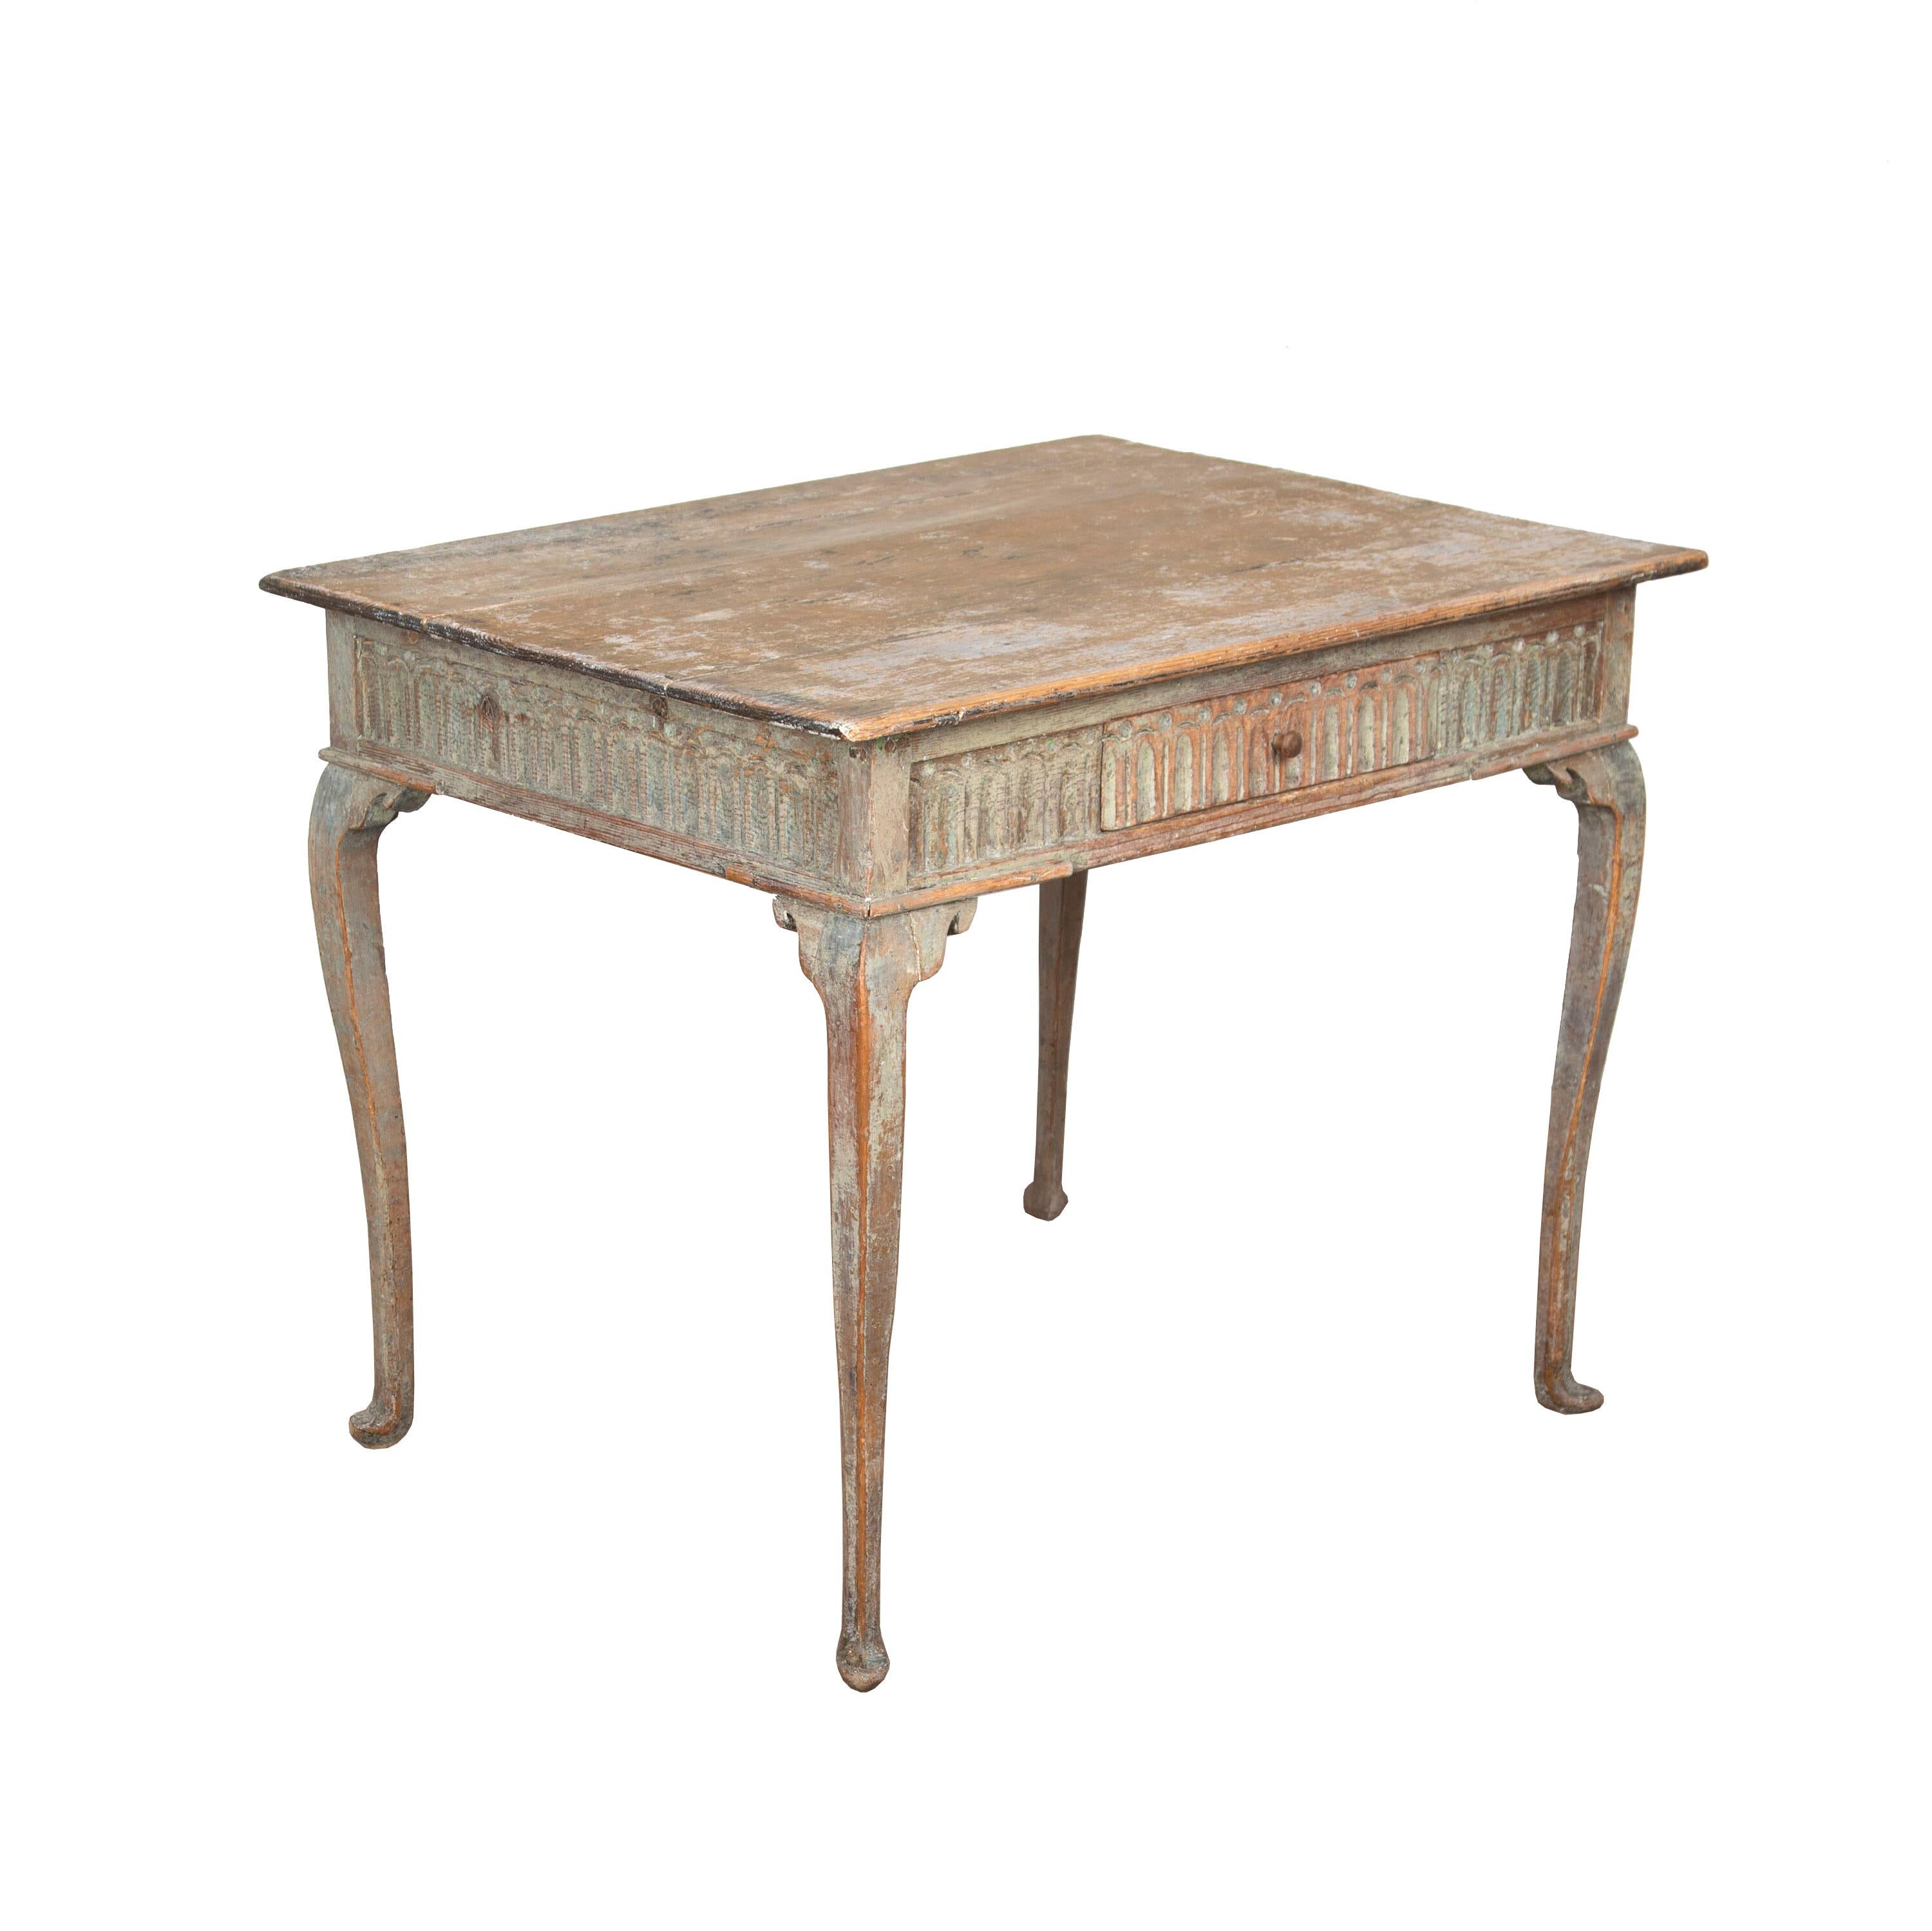 Exceptional period 18th century period table from Finland - scraped to original paint. This piece features a square table top with curved edges, decorative carved stretcher with the carving going all around the table, and four cabriolet legs